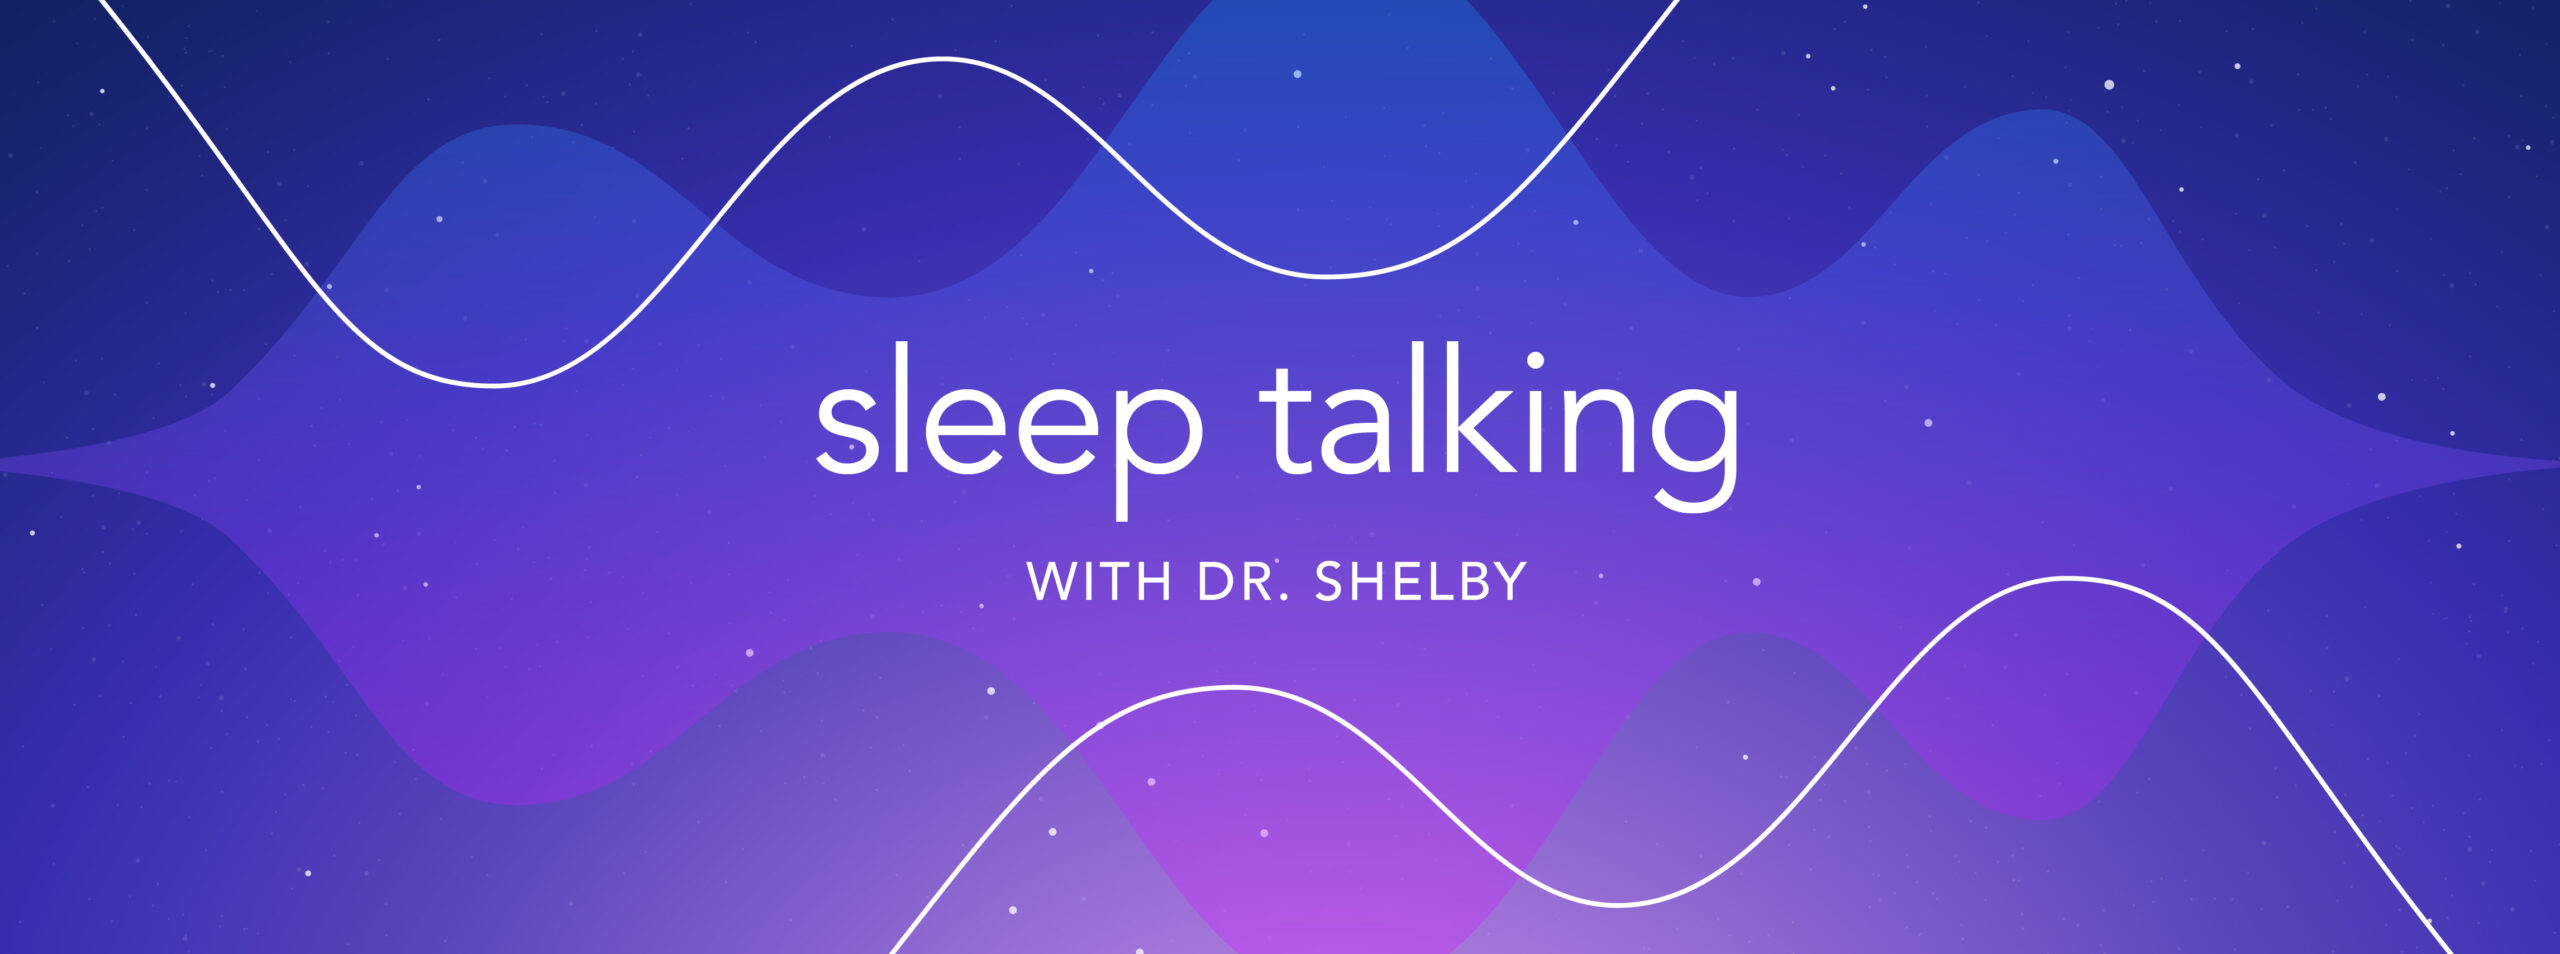 Sleep Research Roundup March 2019 Neil Stanley Podcast